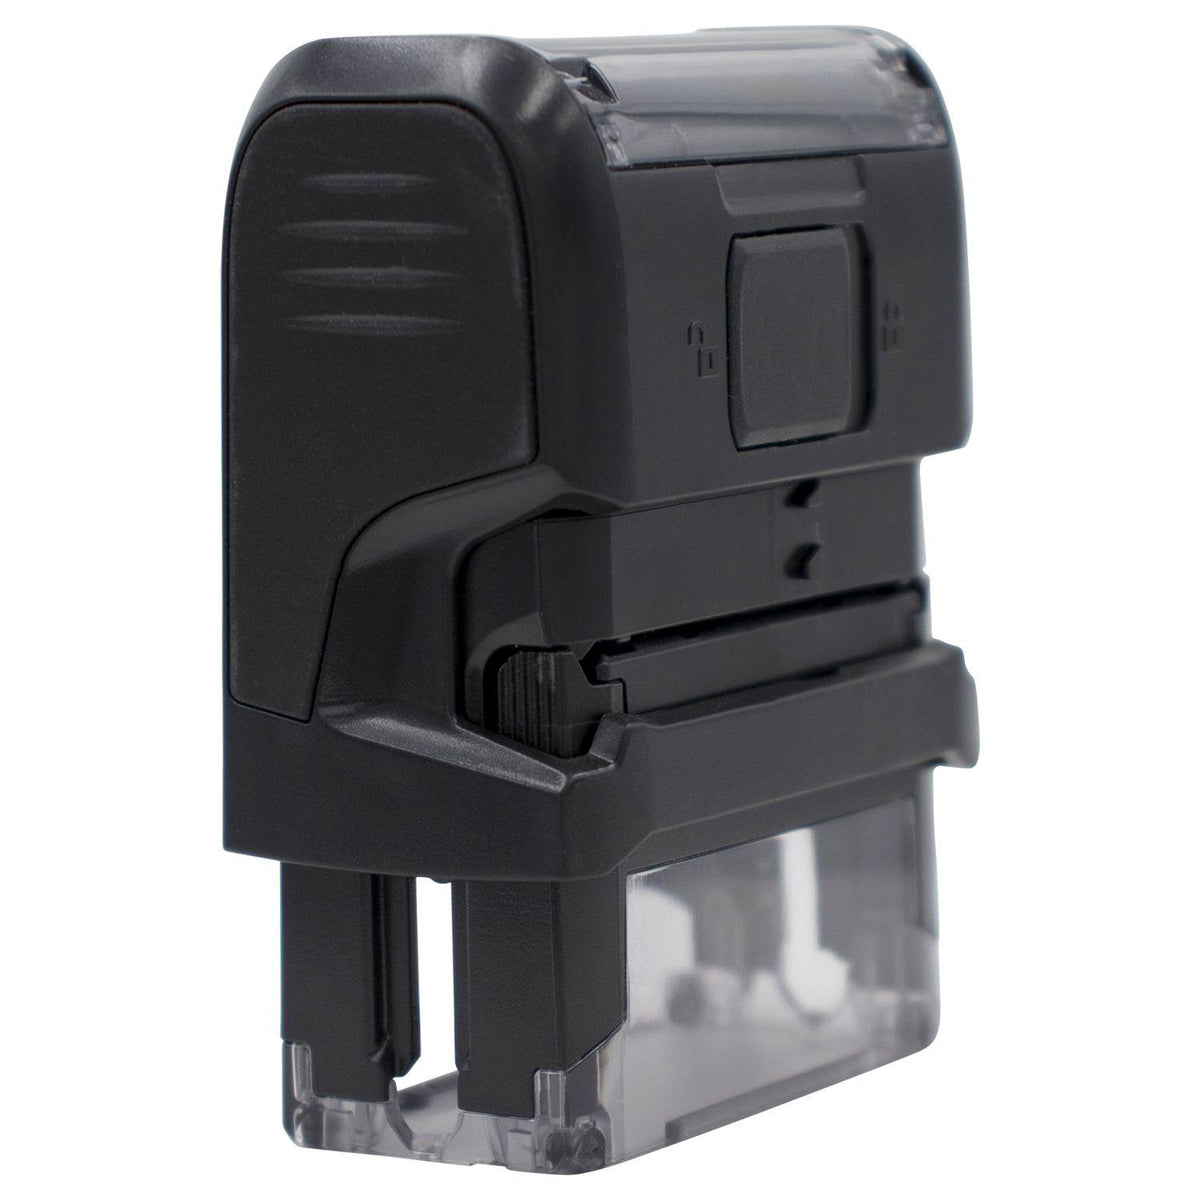 Self Inking Court Copy Stamp - Engineer Seal Stamps - Brand_Trodat, Impression Size_Small, Stamp Type_Self-Inking Stamp, Type of Use_Legal